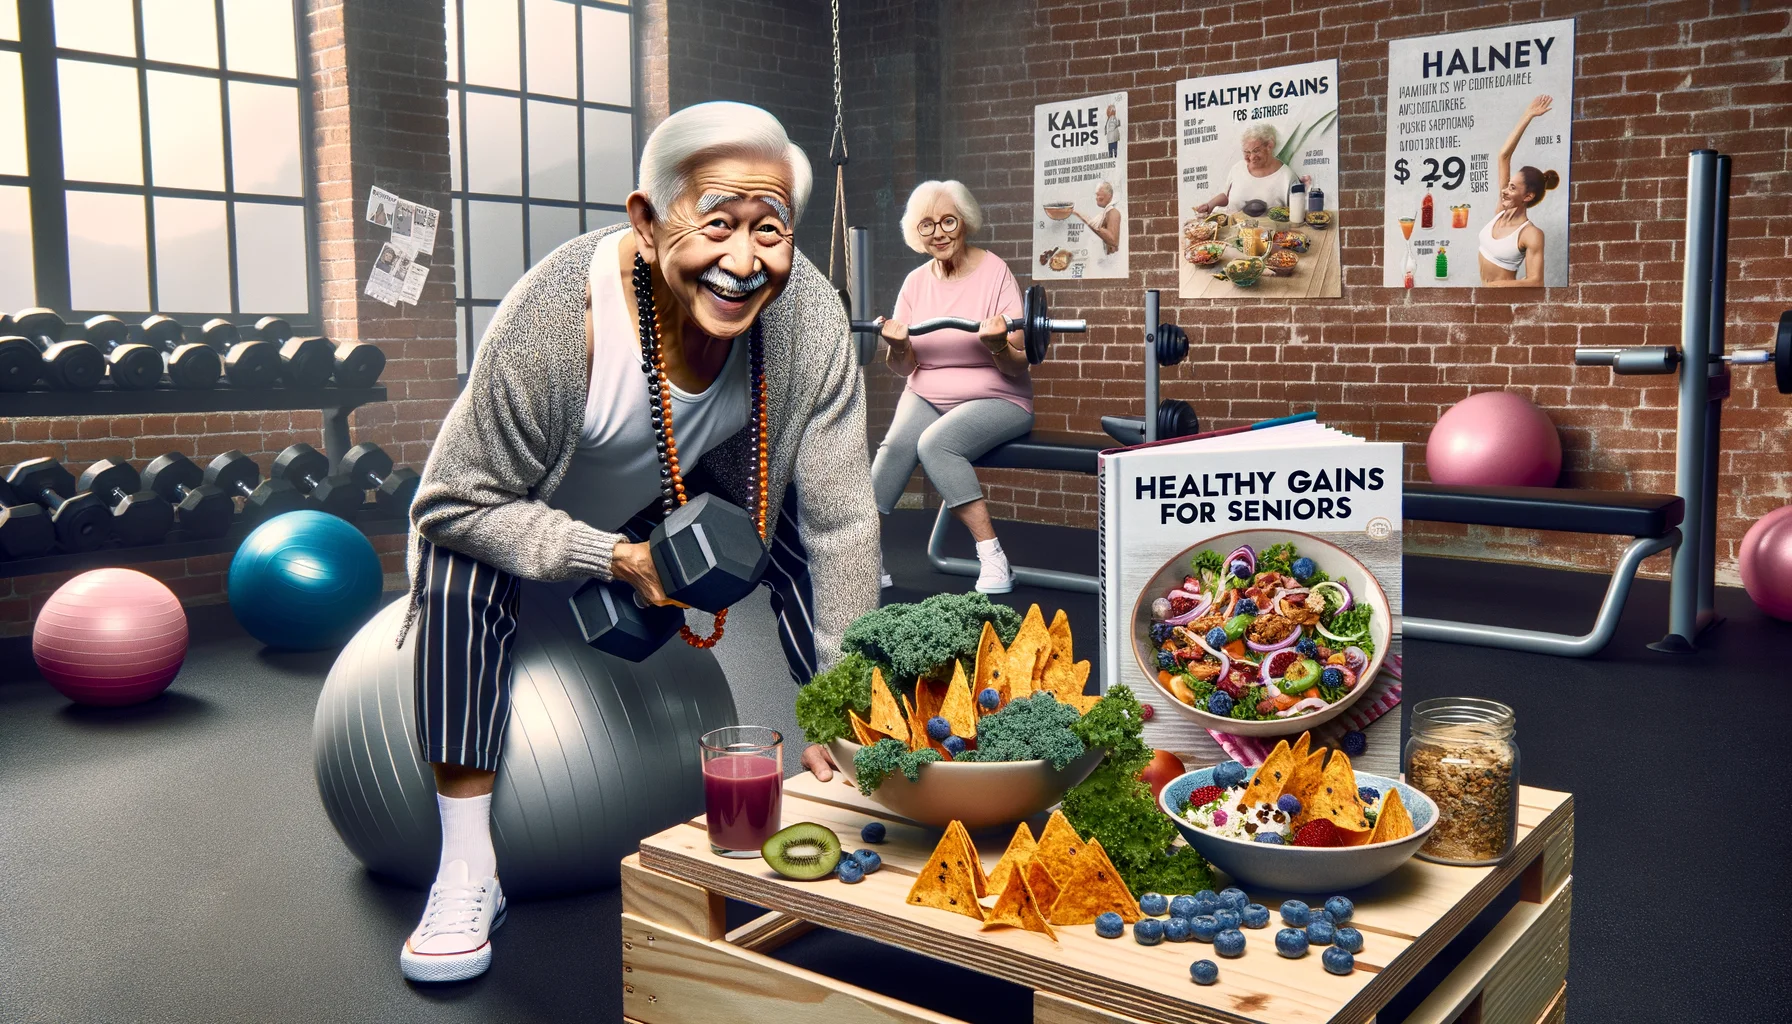 Create a humorous, realistic scene illustrating the concept of 'leangains' in an unexpected context with elderly individuals. An elderly South Asian man with a twinkle in his eyes is lifting light dumbbells while balancing on a yoga ball, surrounded by nutritious but delicious food items like kale chips, chicken salad, and protein shakes. Nearby, a Caucasian elderly lady is checking out a recipe book titled 'Healthy gains for seniors', a smirk playing on her lips. The environment is a lively senior fitness center, with exercise equipment and health posters about the walls, evoking both laughter and a sense of wellness.